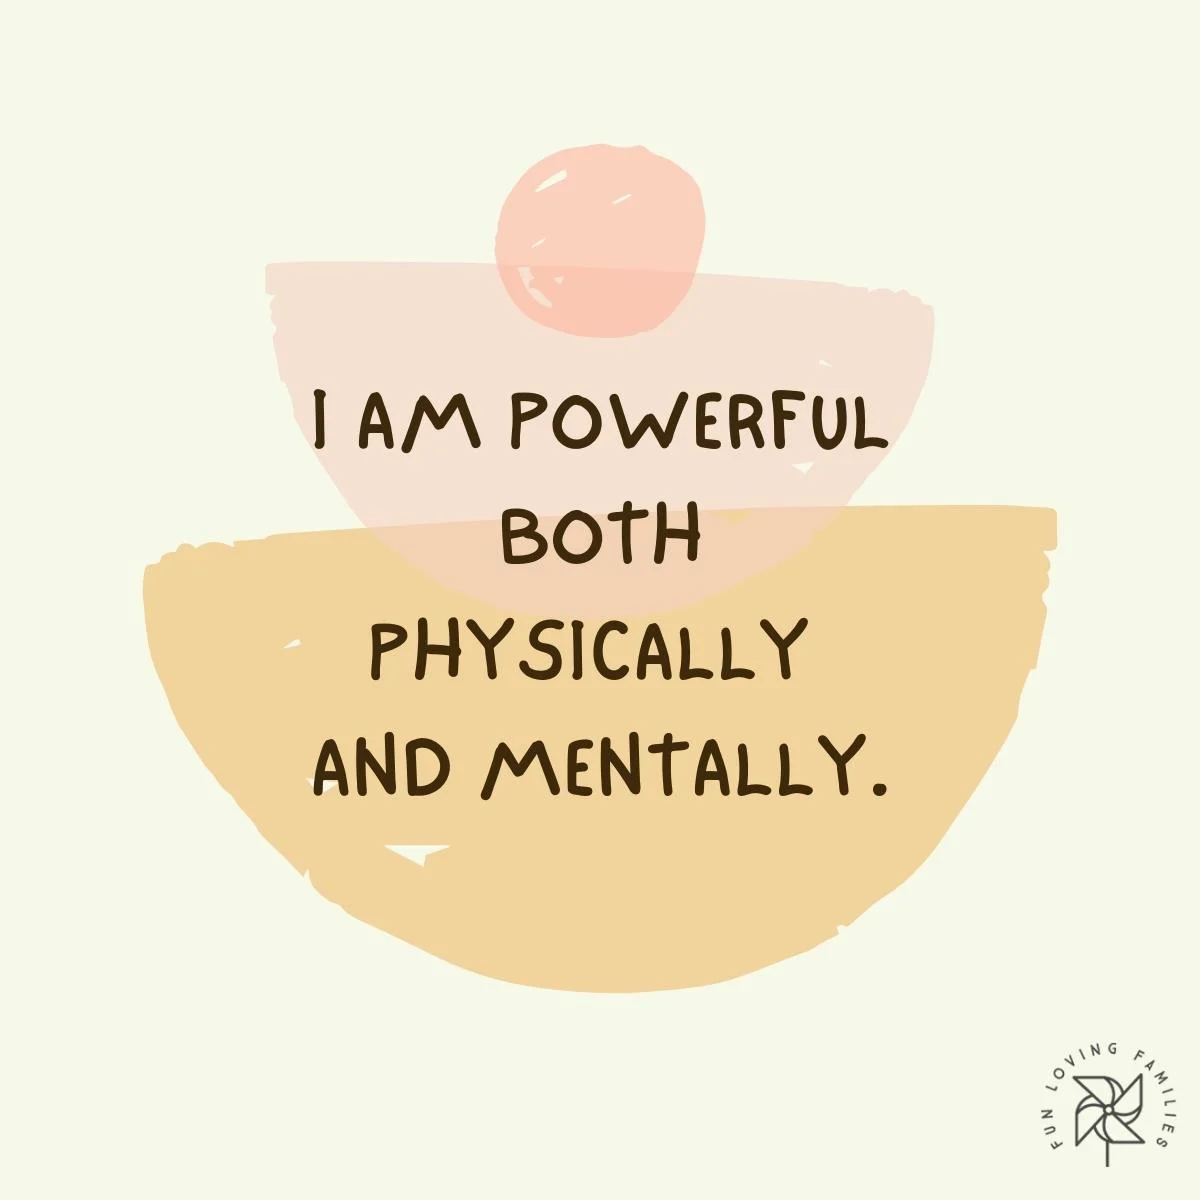 I am powerful both physically and mentally affirmation